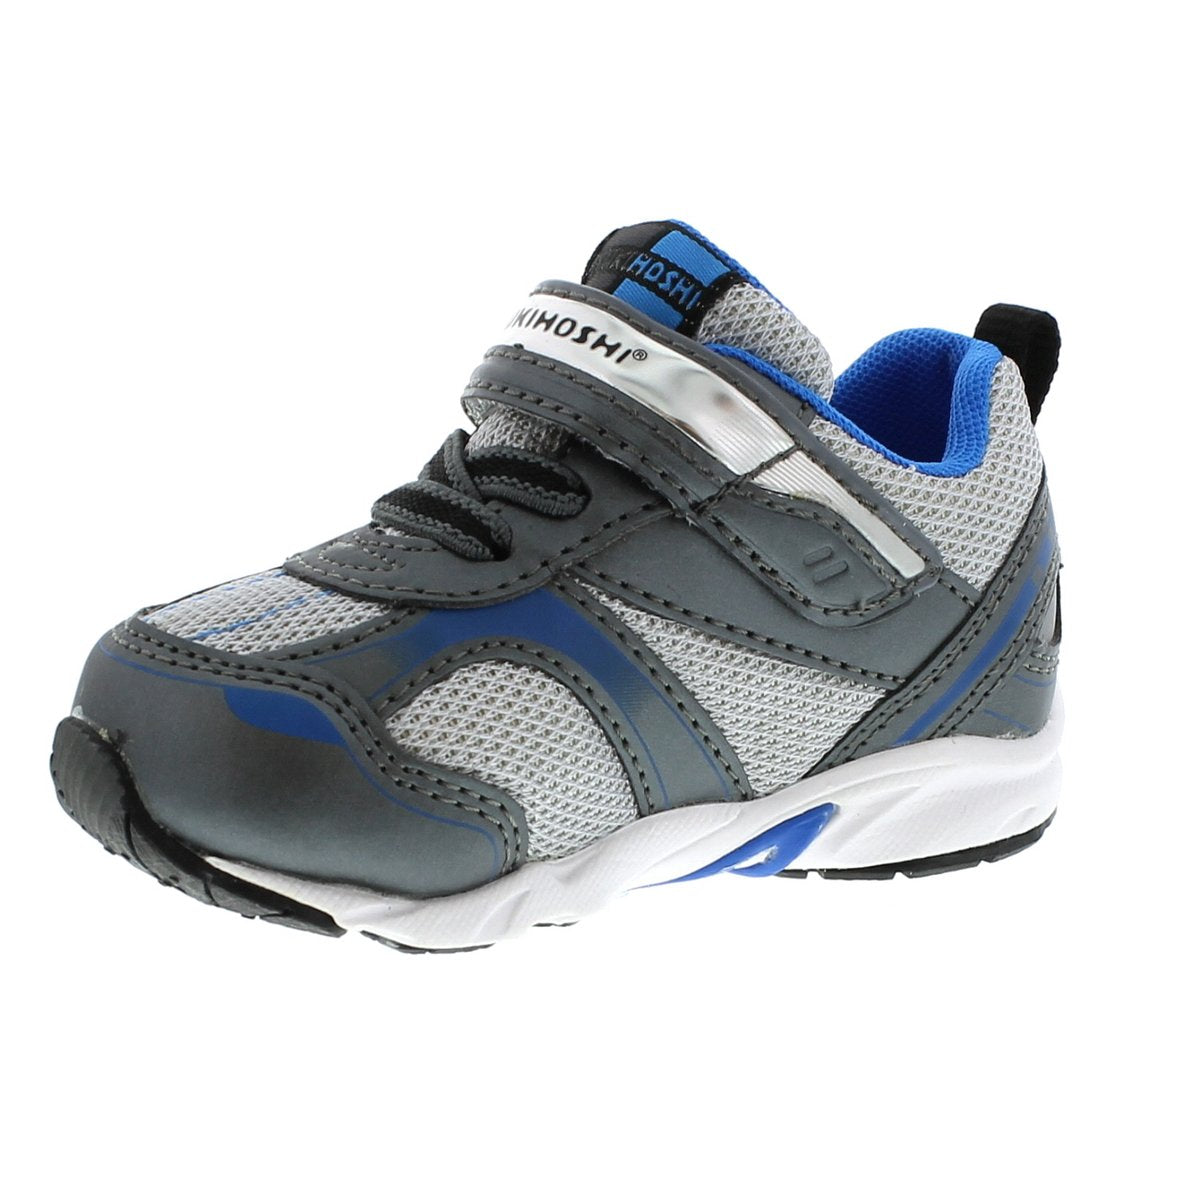 Baby Tsukihoshi Sport Sneaker in Graphite/Royal from the front view